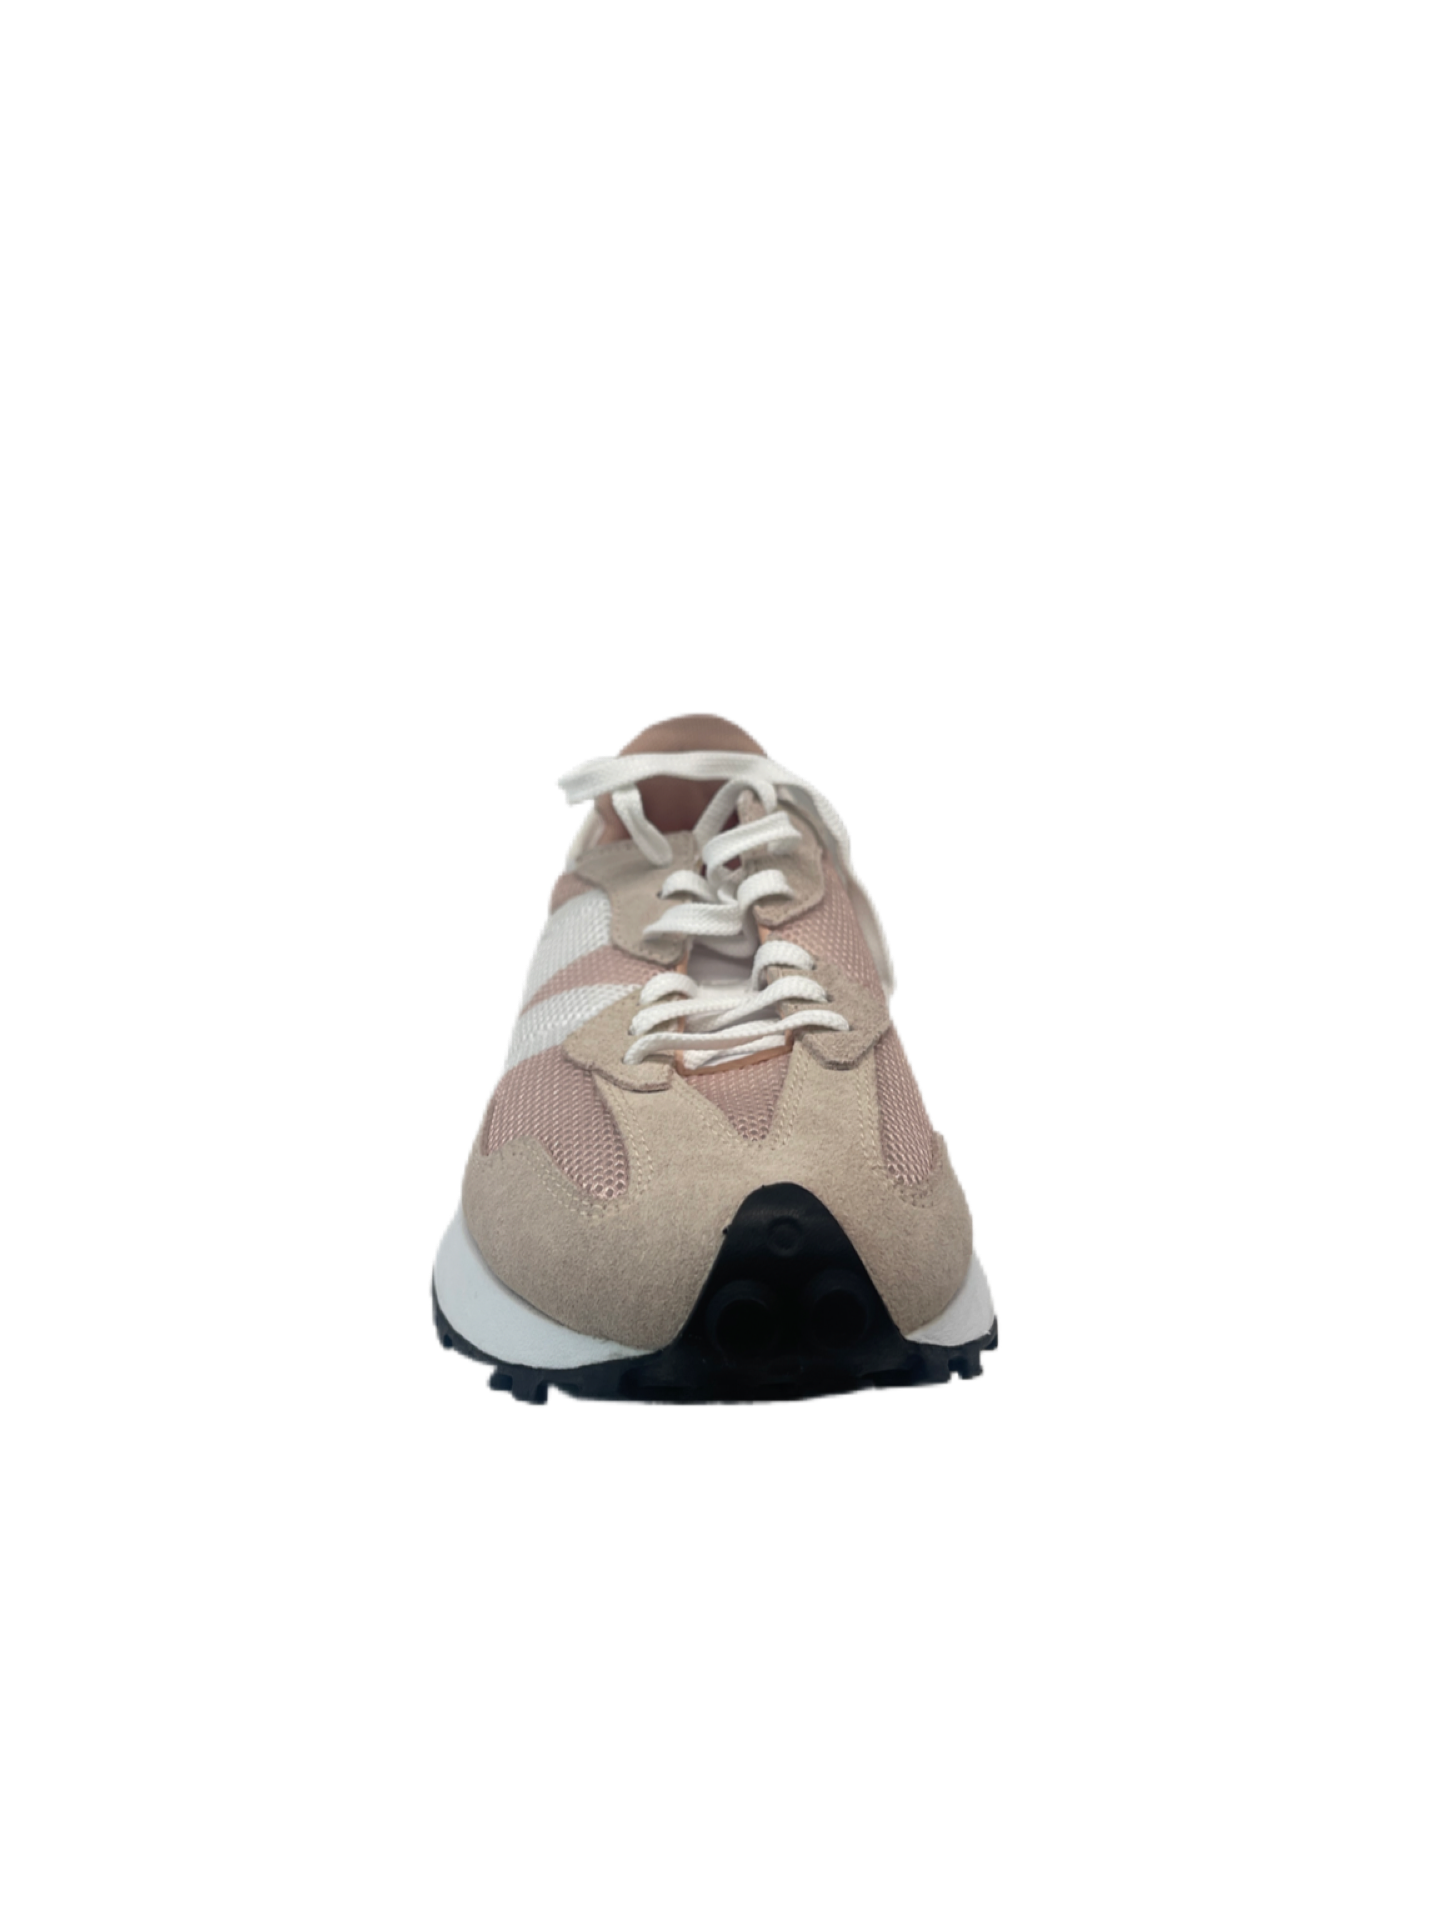 New Balance White & Pink Lace Up Sneakers. Size: 40.5